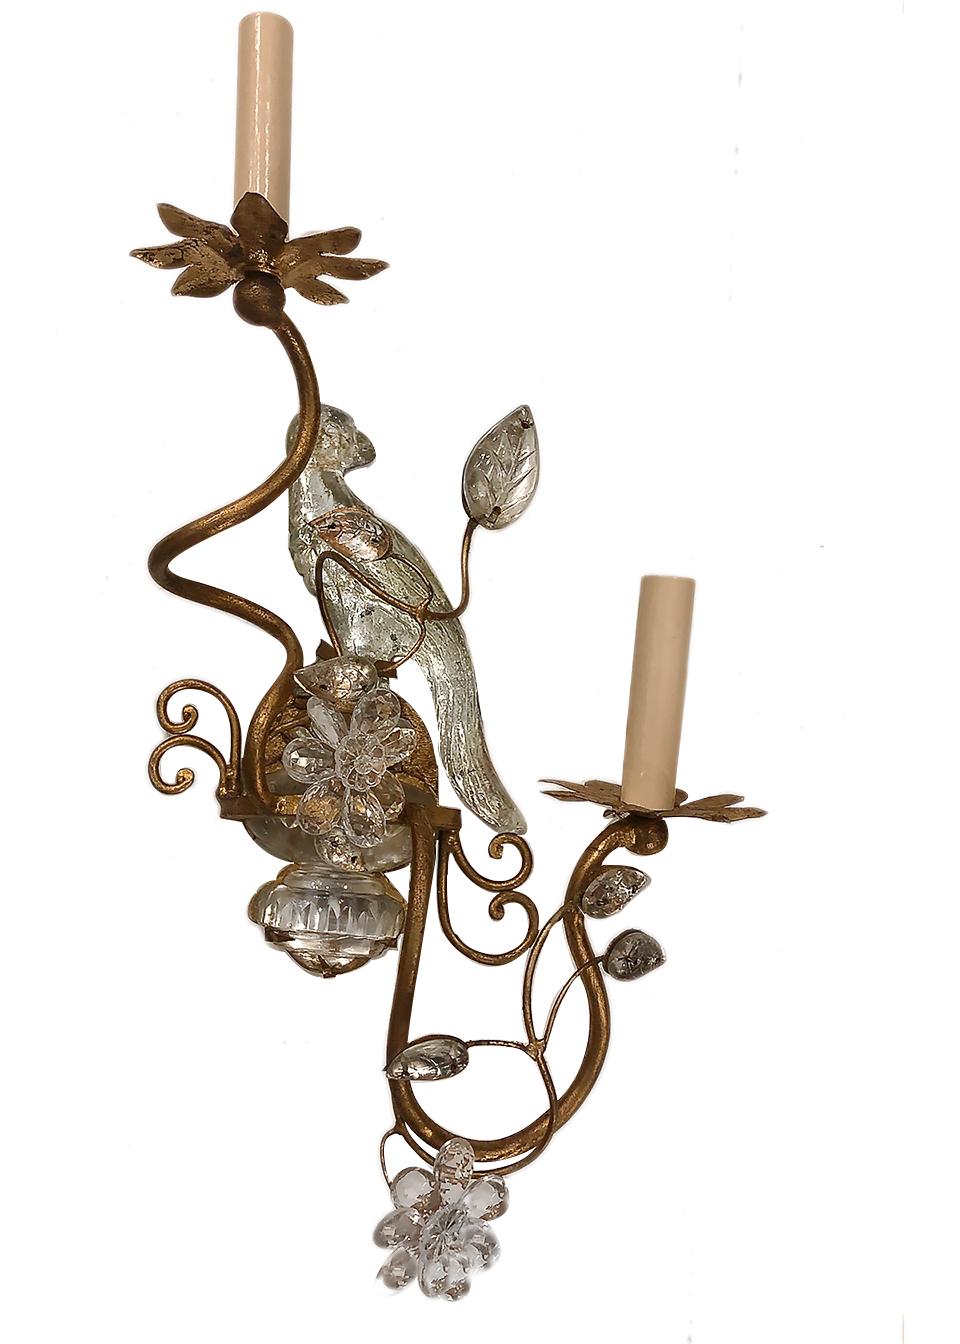 A set of four circa 1930s French gilt metal sconces with molded glass leaves and birds. Sold per pair.

Measurements:
Heigh 21